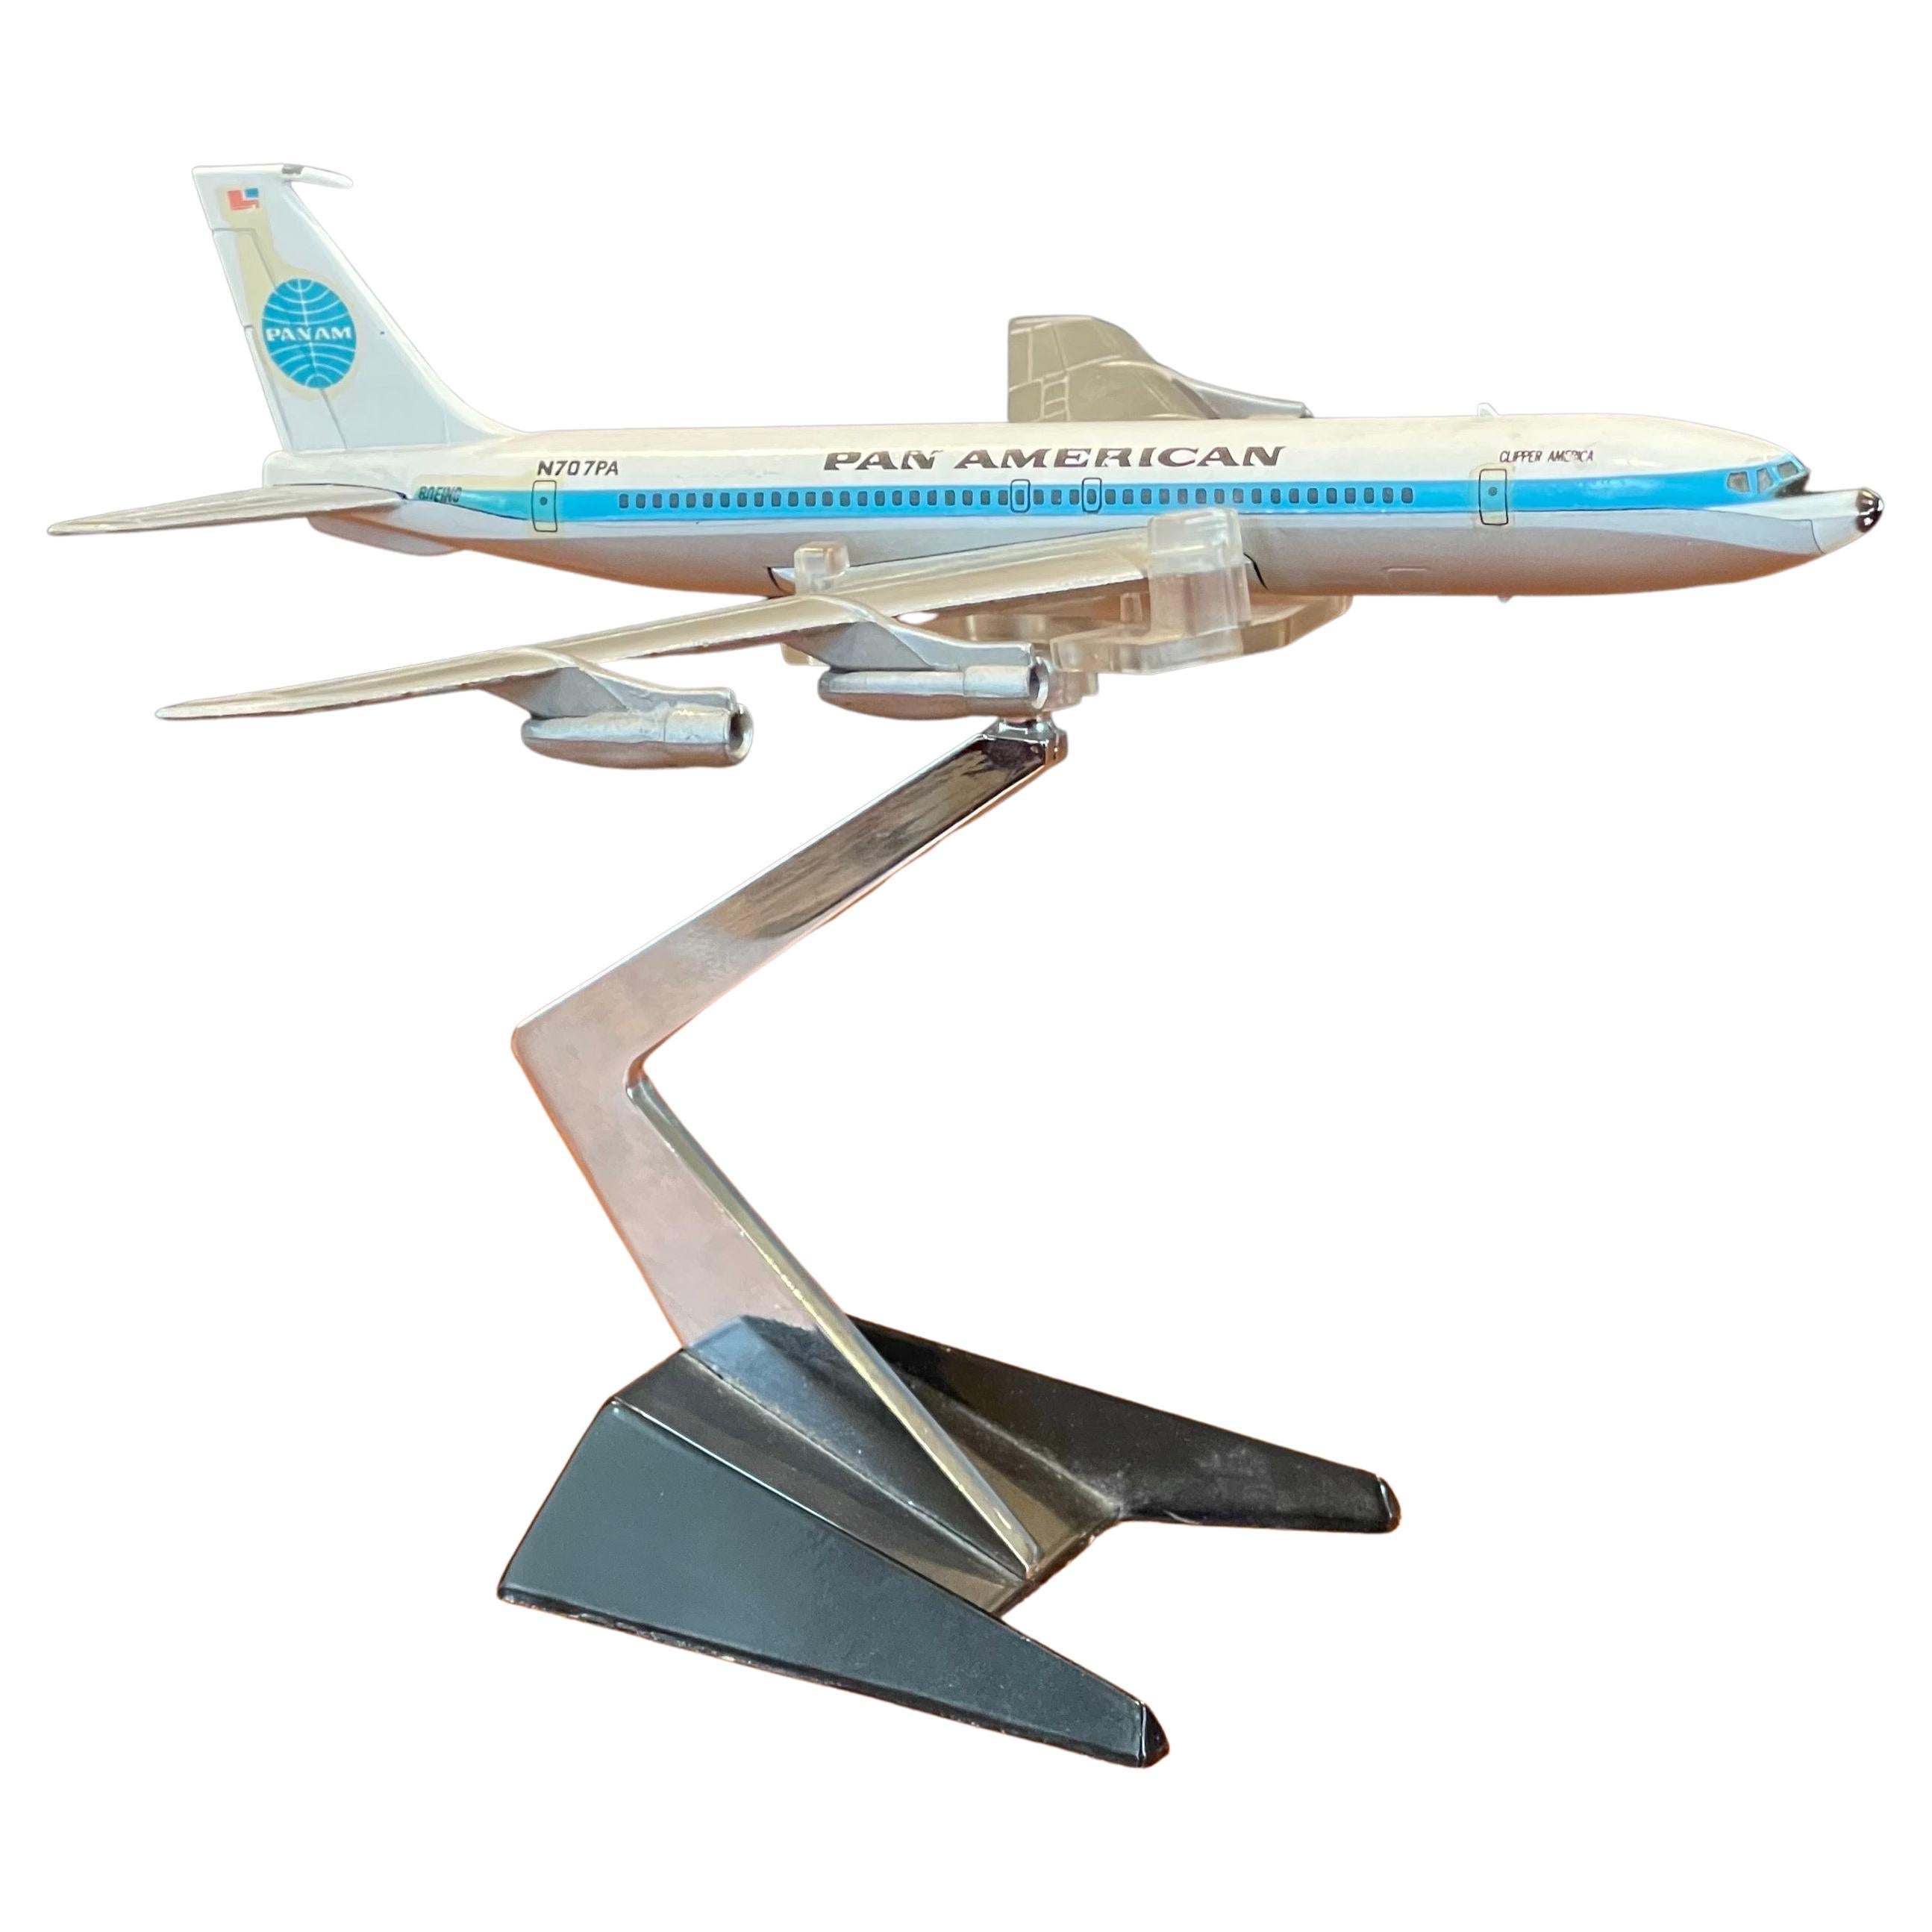 A very cool Pan American Airlines Boeing 707 jetliner / airplane desk model by Aero Mini of Japan, circa 1970s.  The model measures 7.5